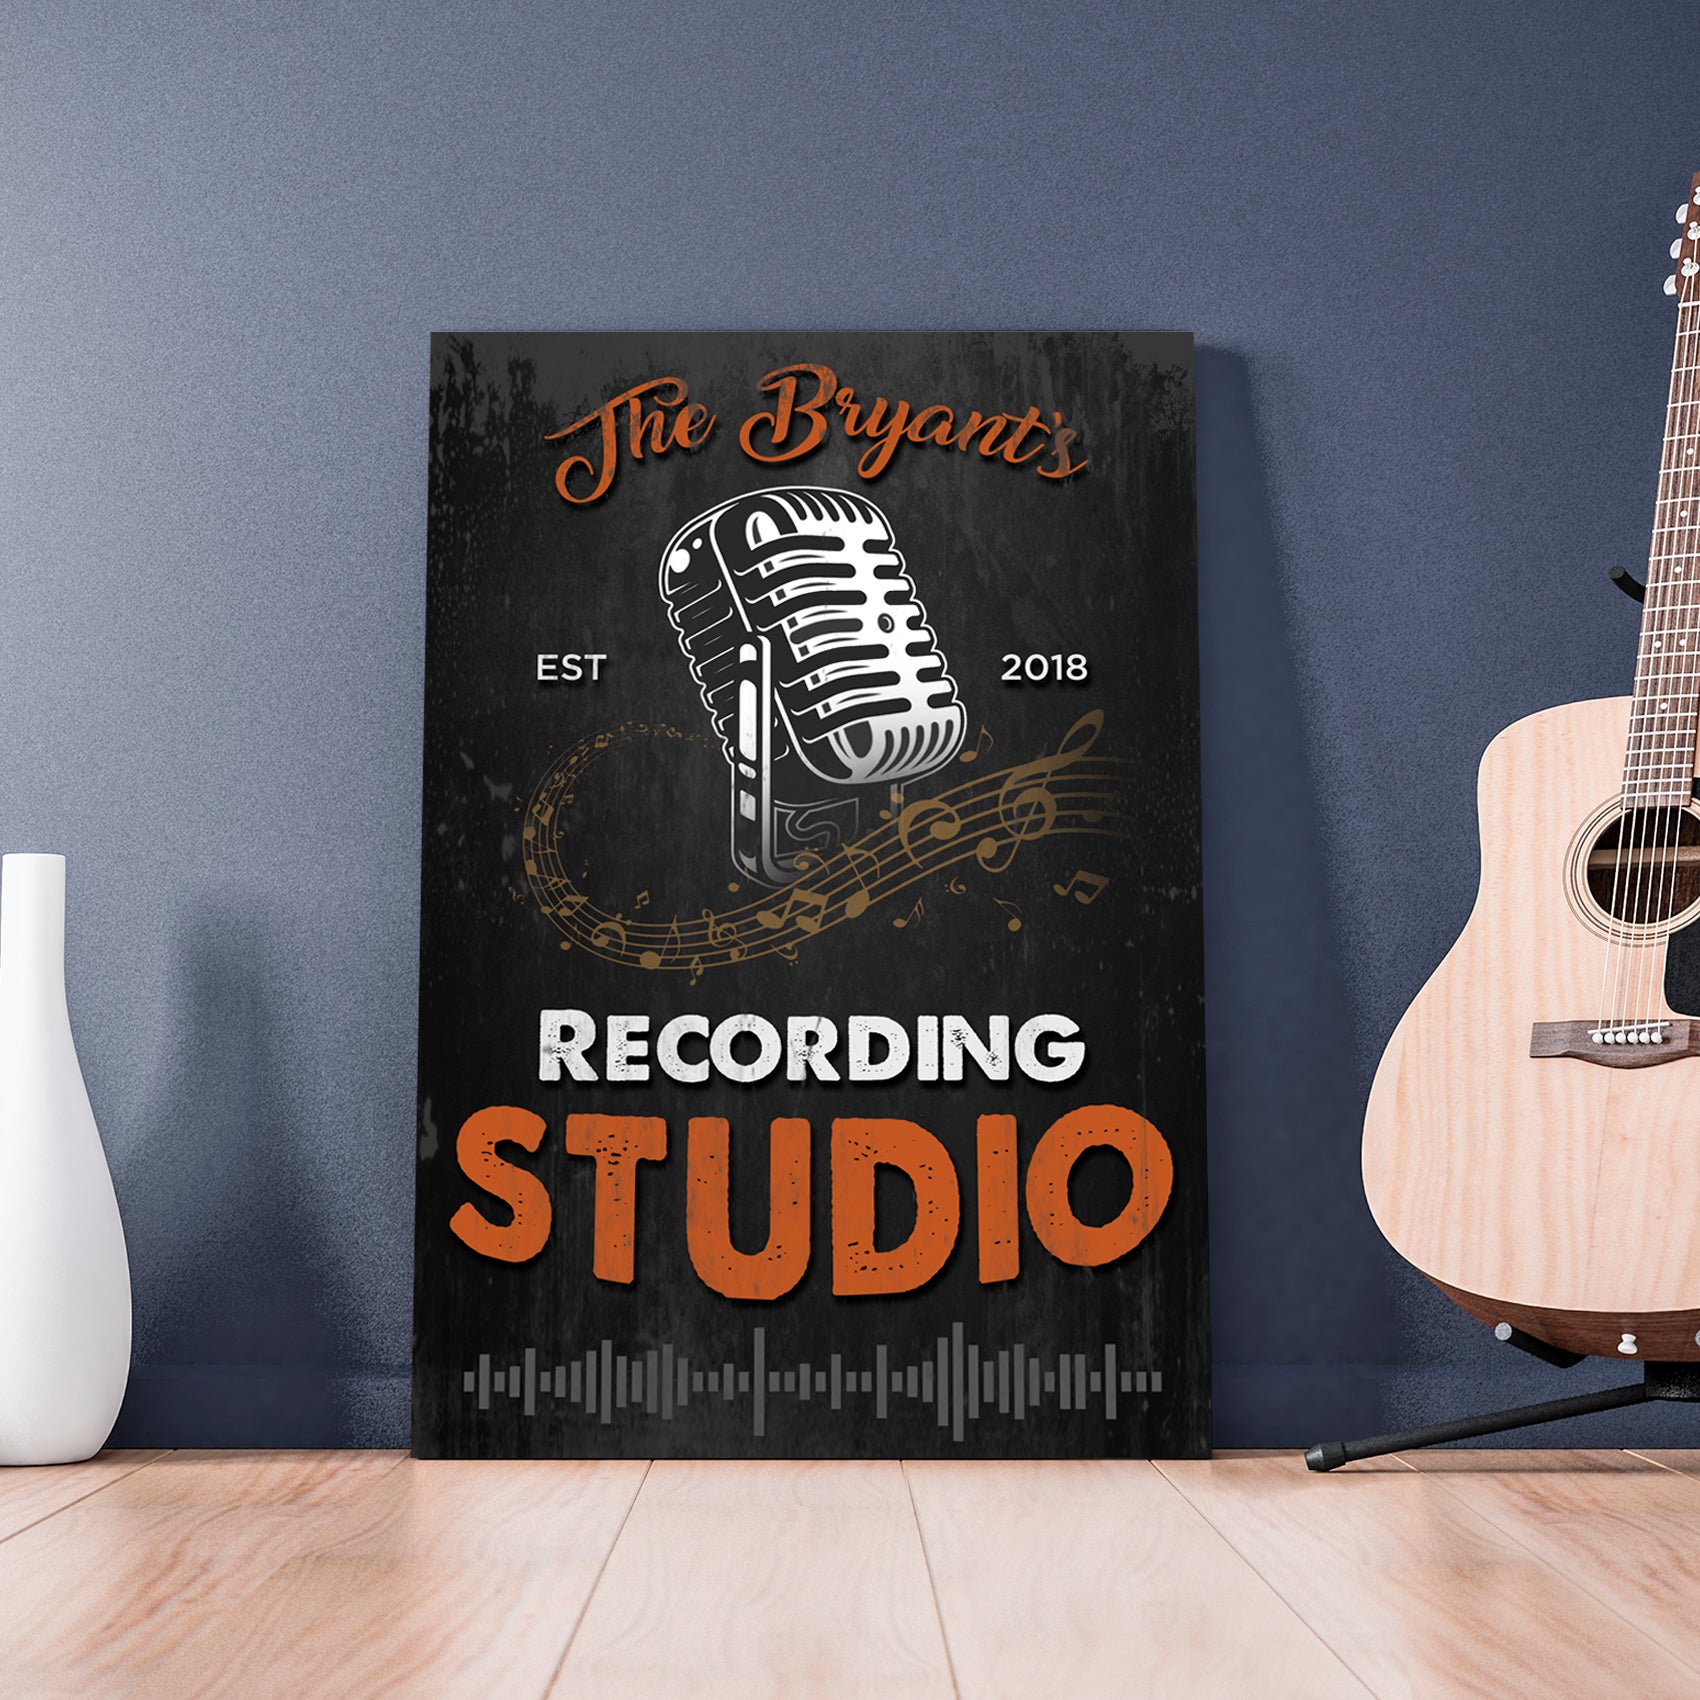 Music Recording Studio Sign - Image by Tailored Canvases